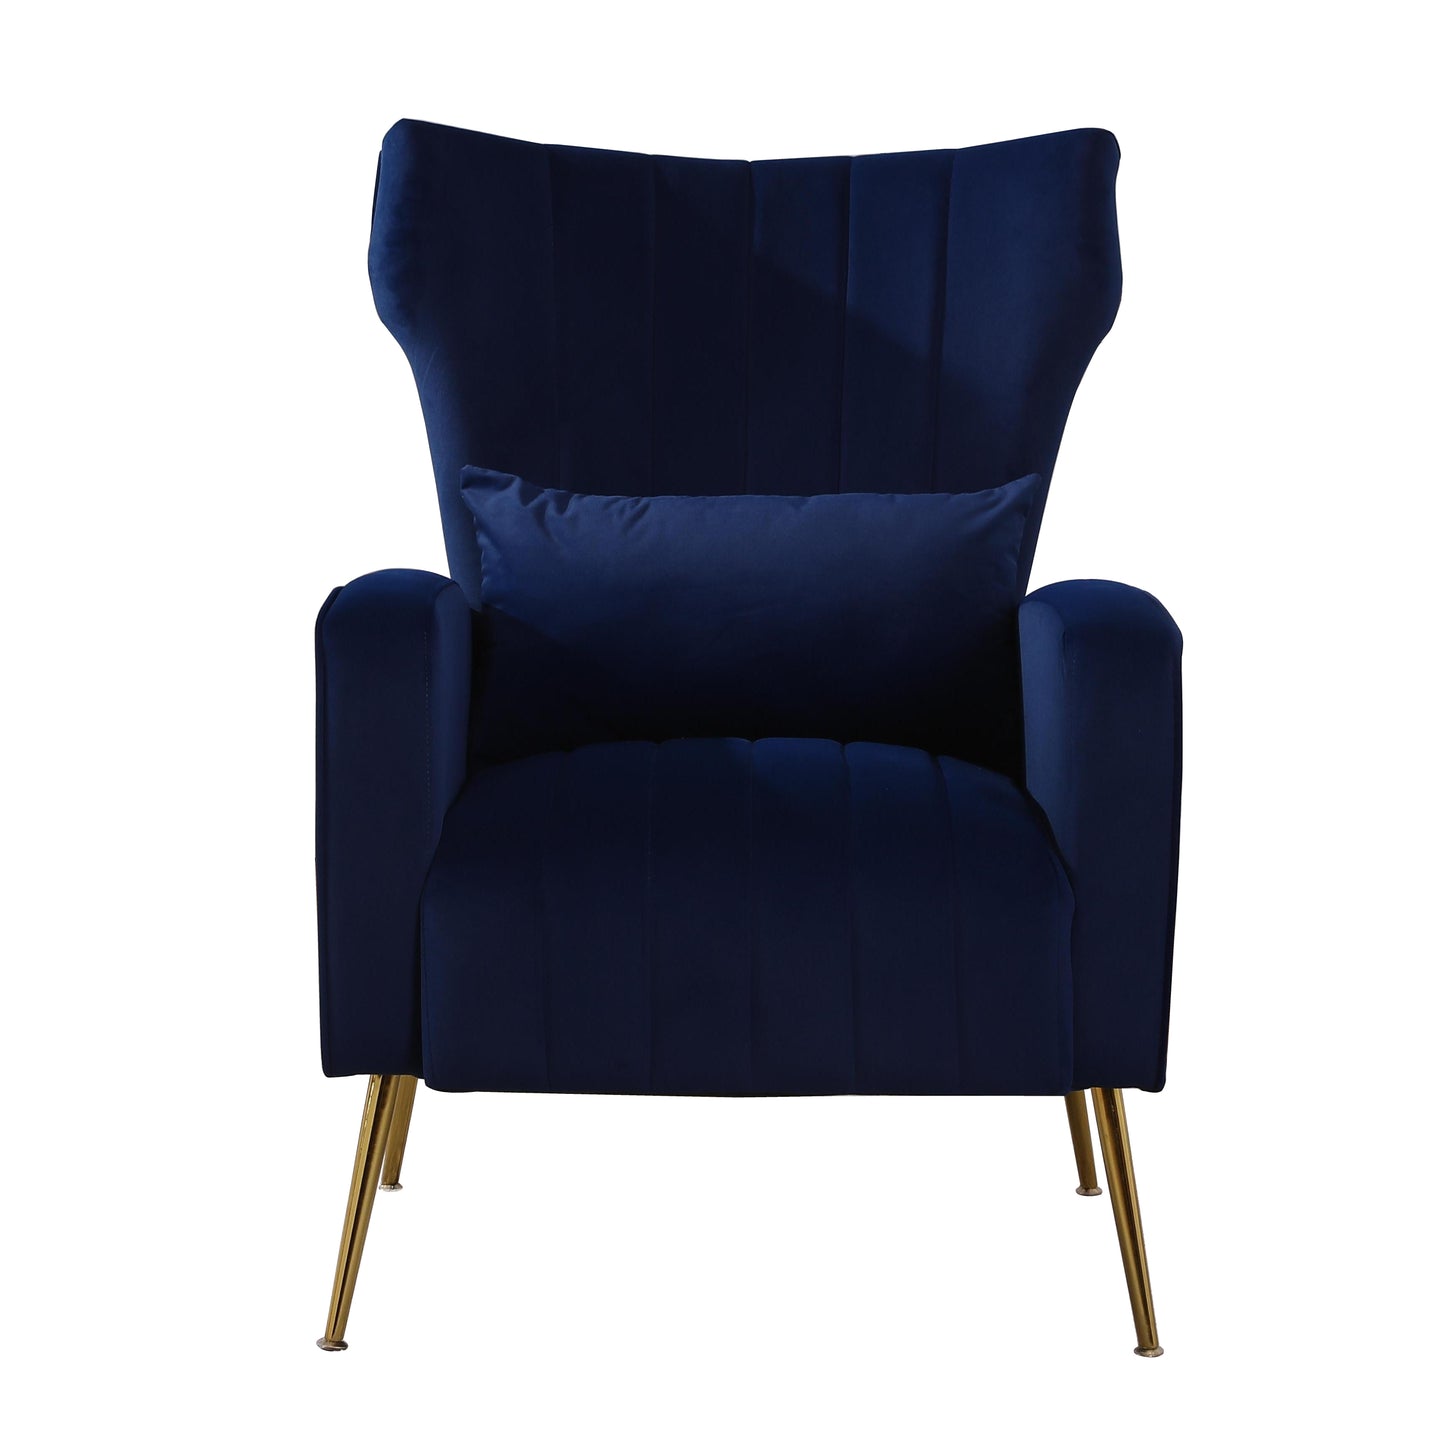 FONDHOME Velvet Accent Chair, Modern Living Room Armchair Comfy Upholstered Single Sofa Chair for Bedroom Dorms Reading Reception Room with Gold Legs & Small Pillow, Royal Blue